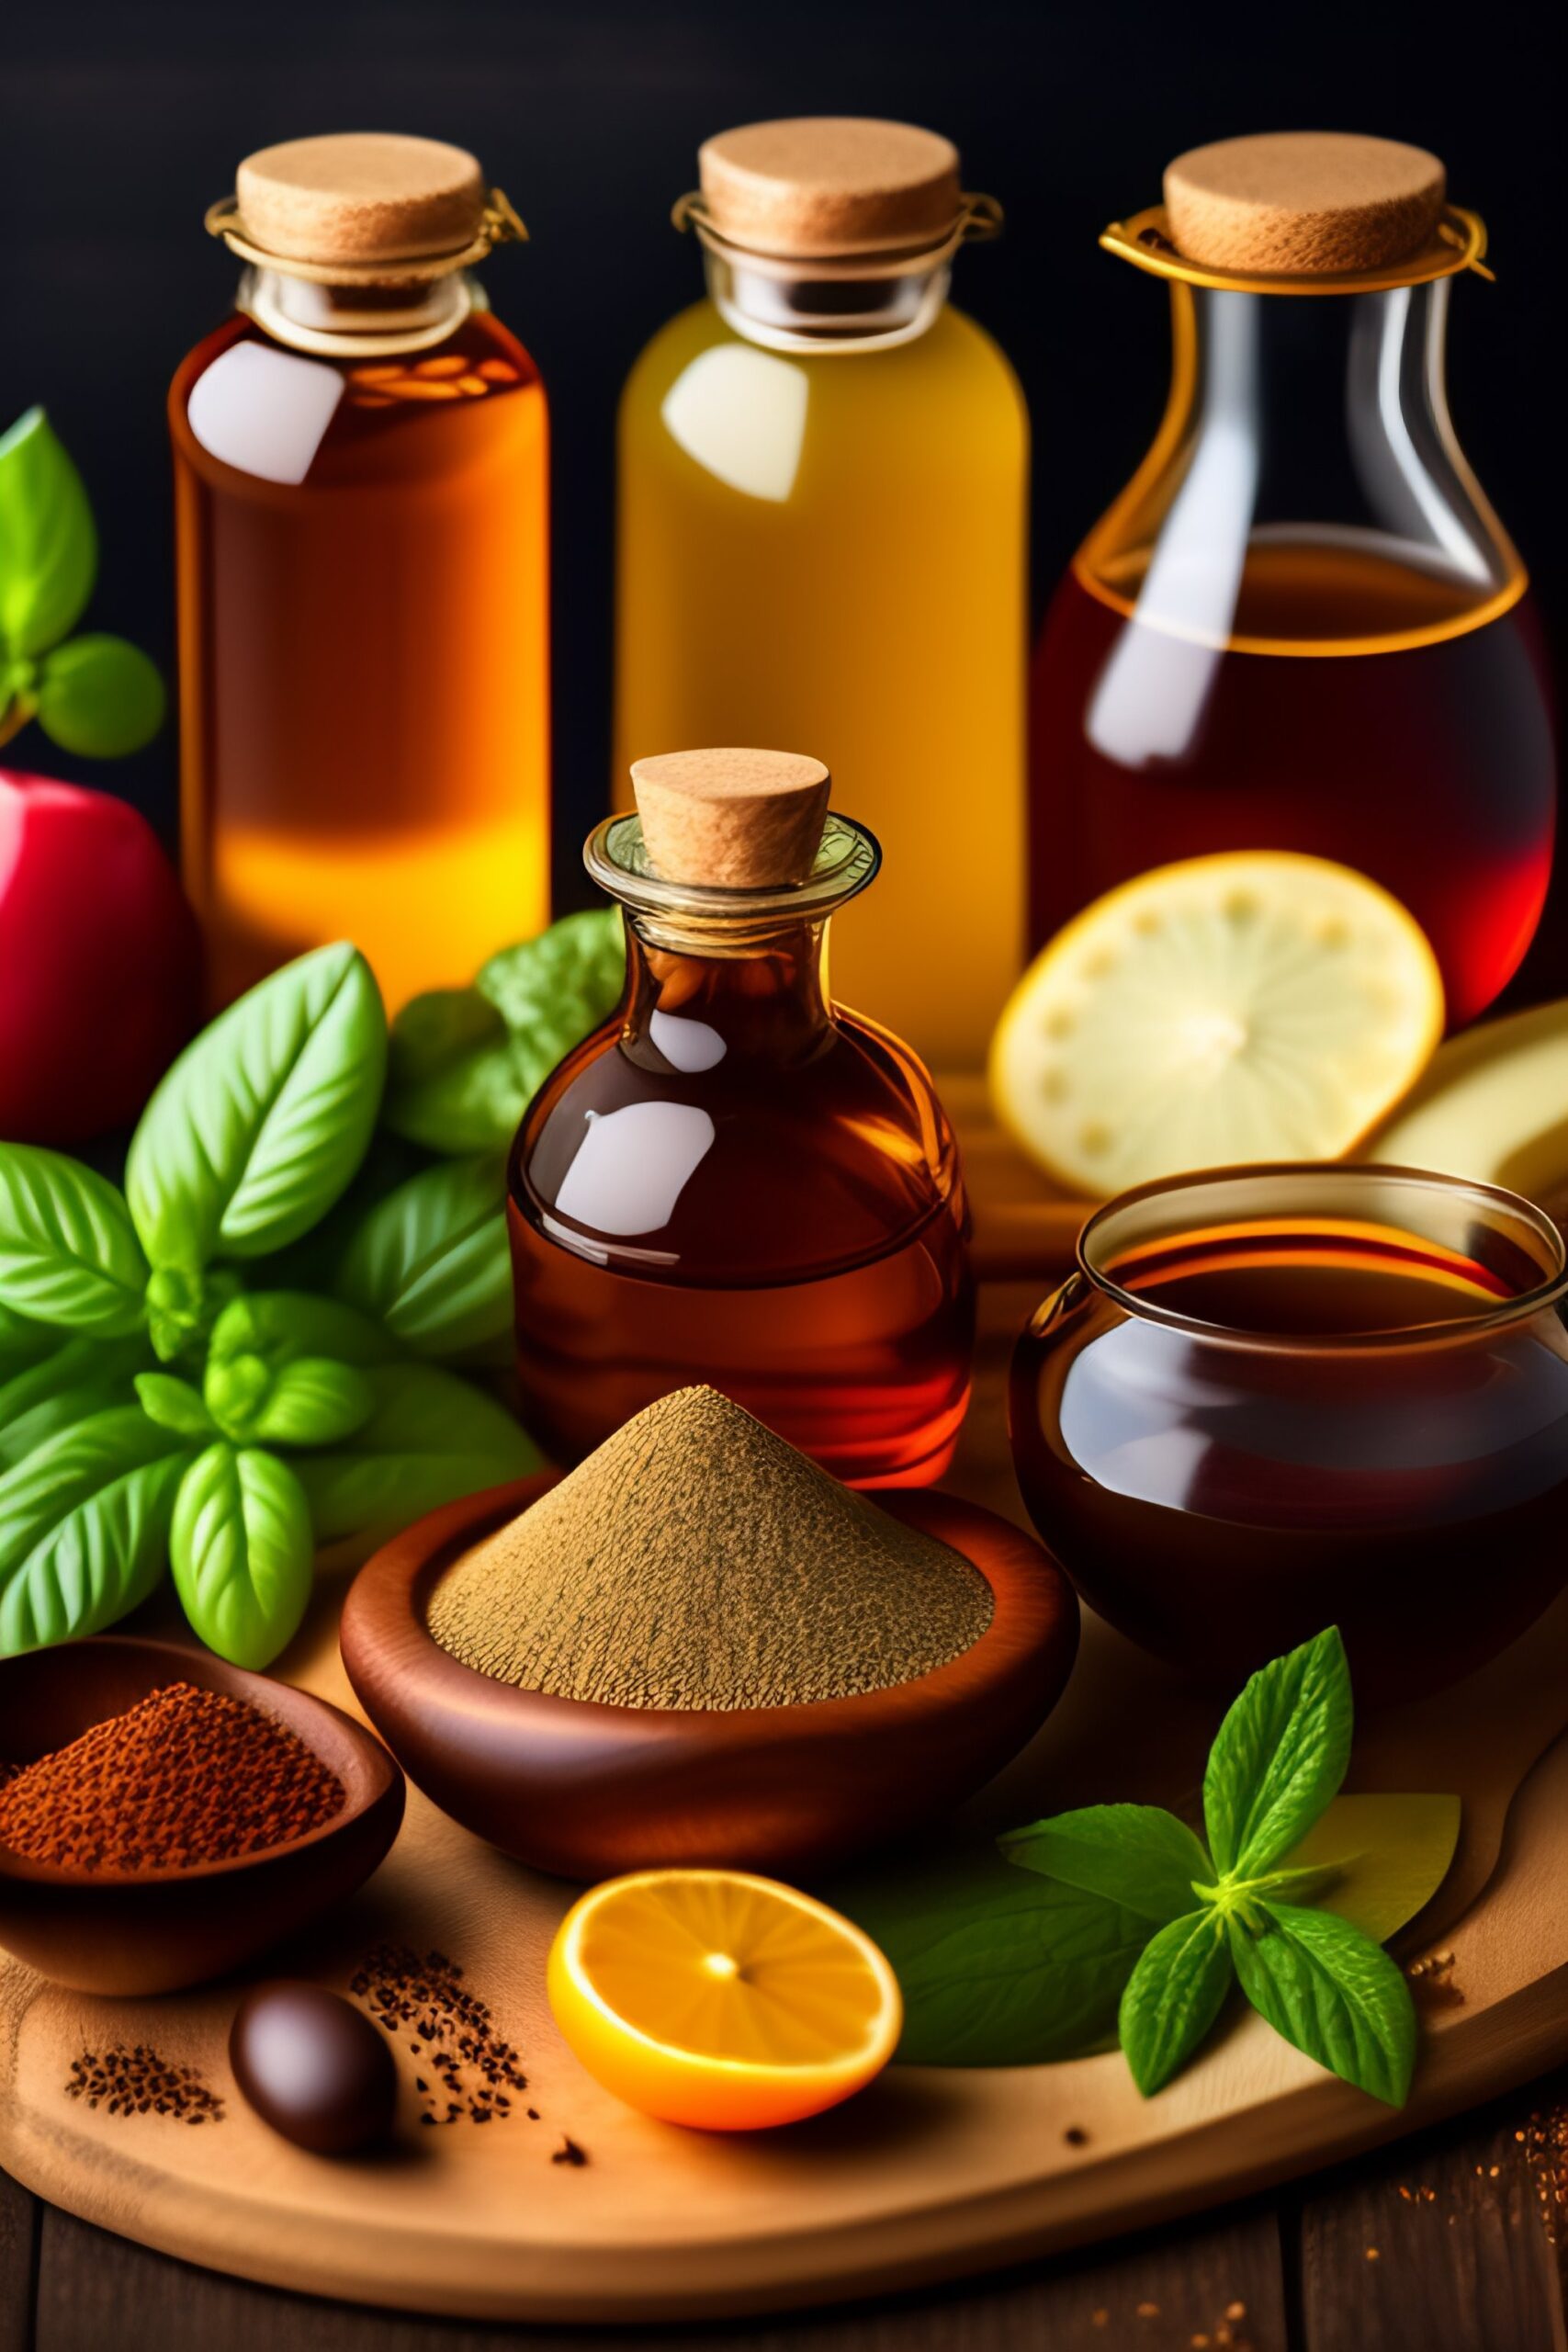 comparison and contrast essay on medicine and natural remedies